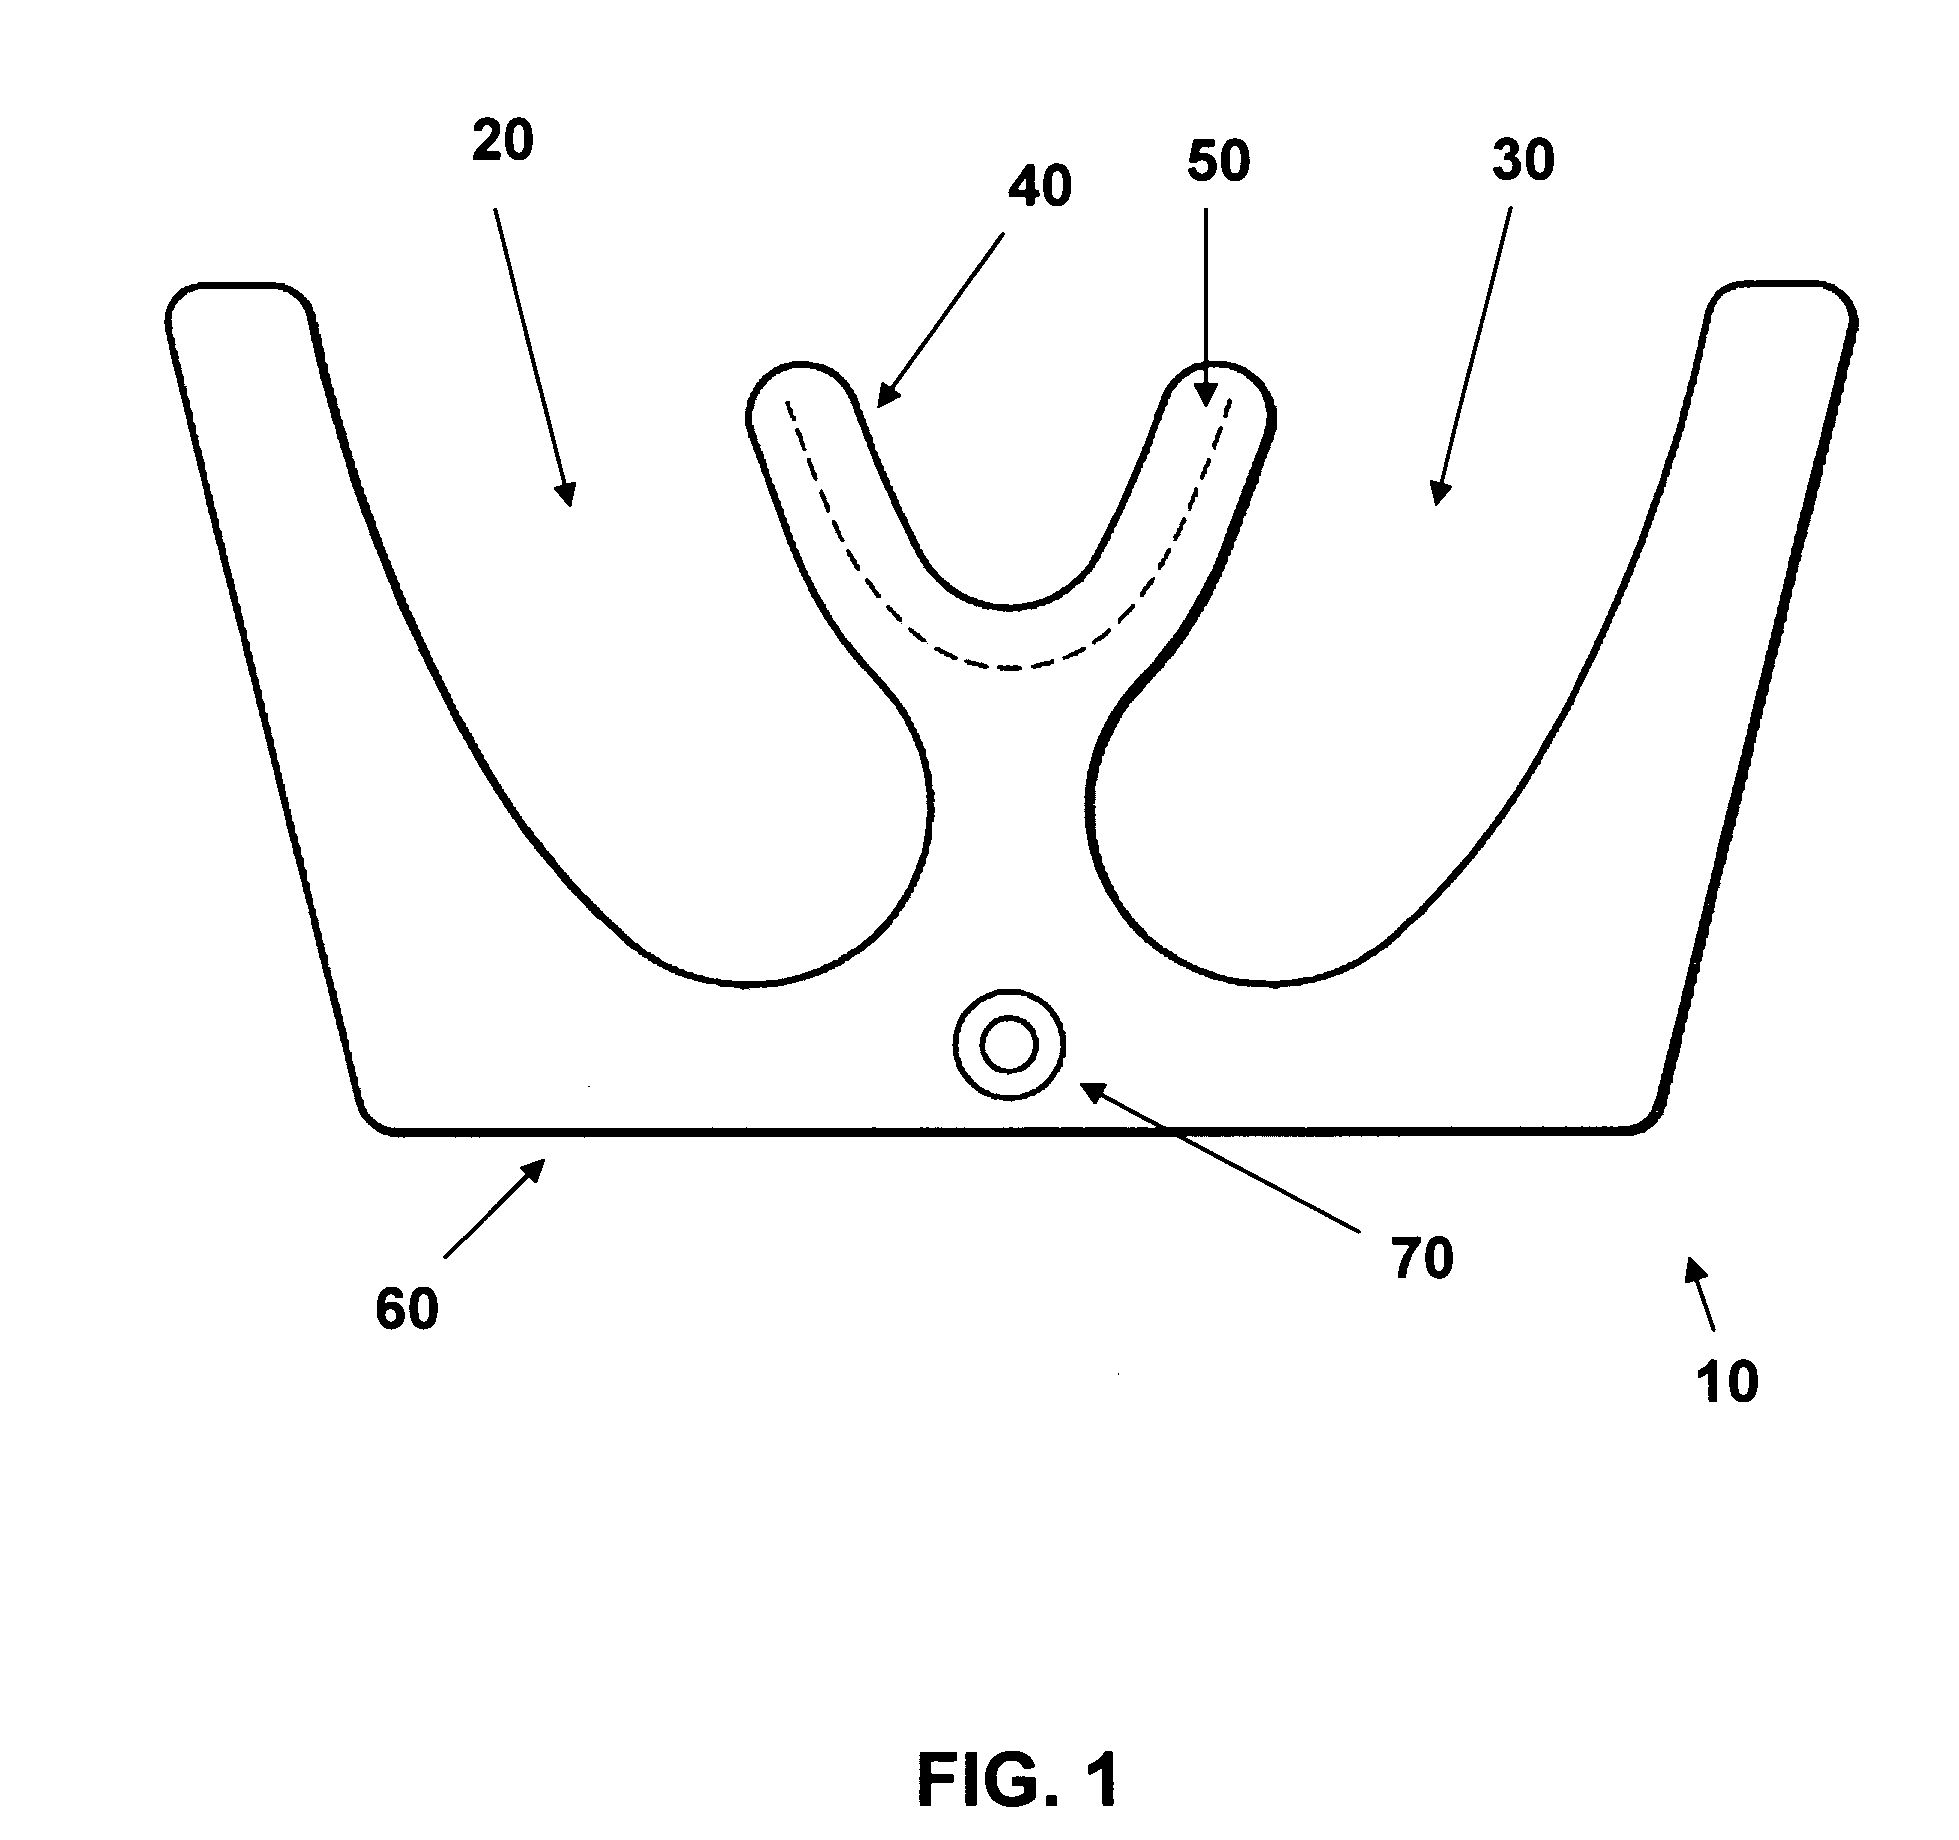 Novel method and device for positioning patients for dental imaging